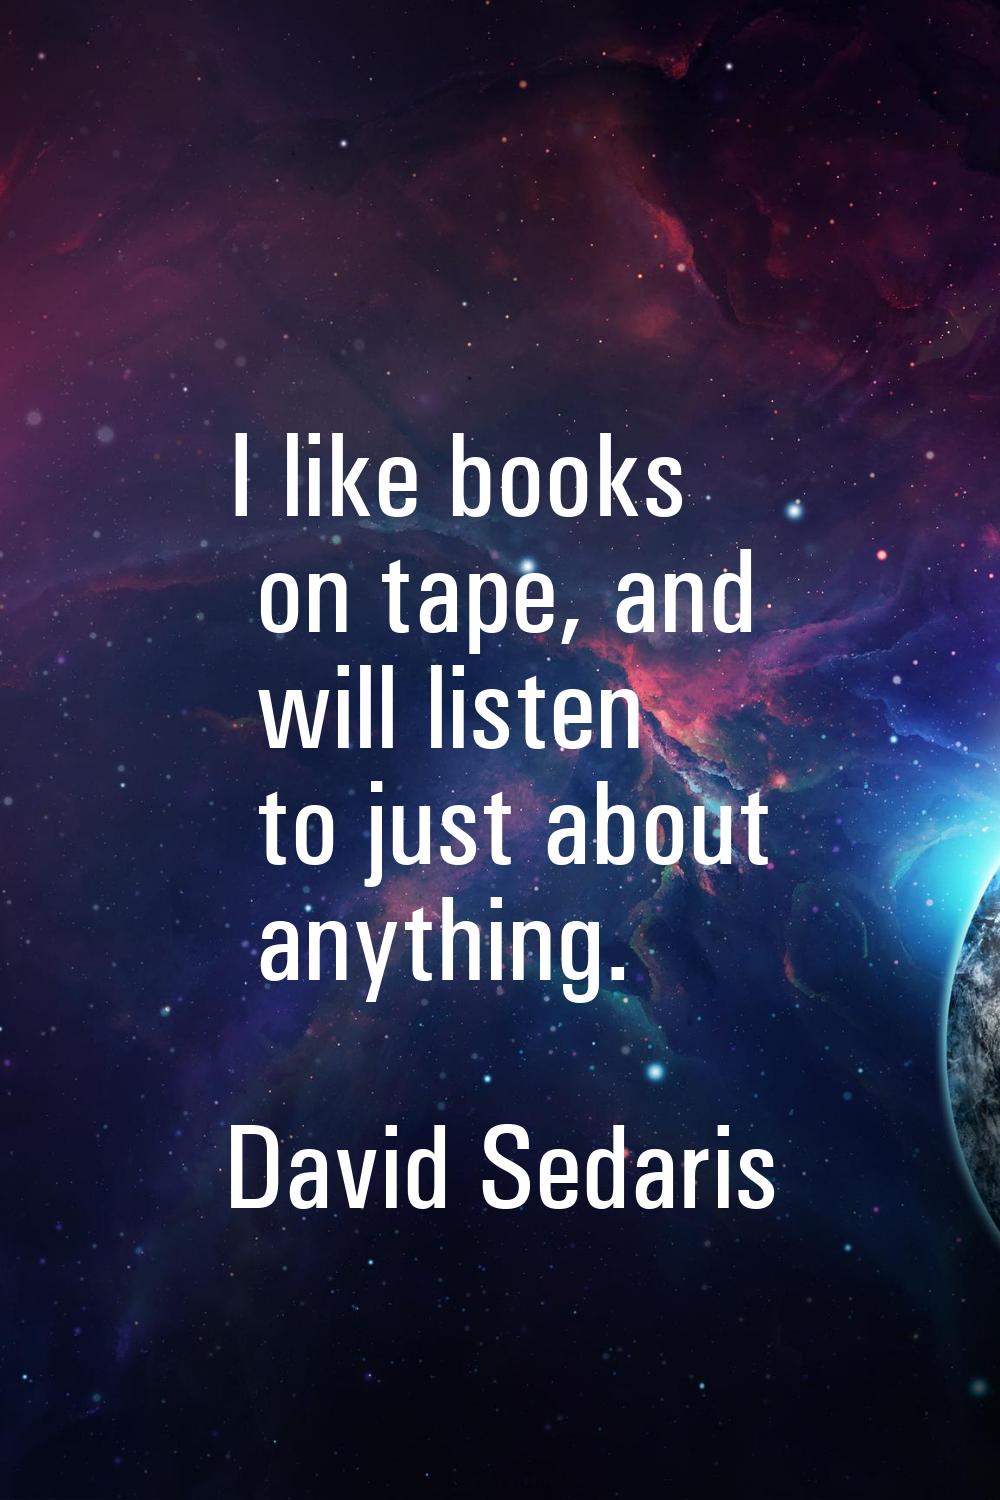 I like books on tape, and will listen to just about anything.